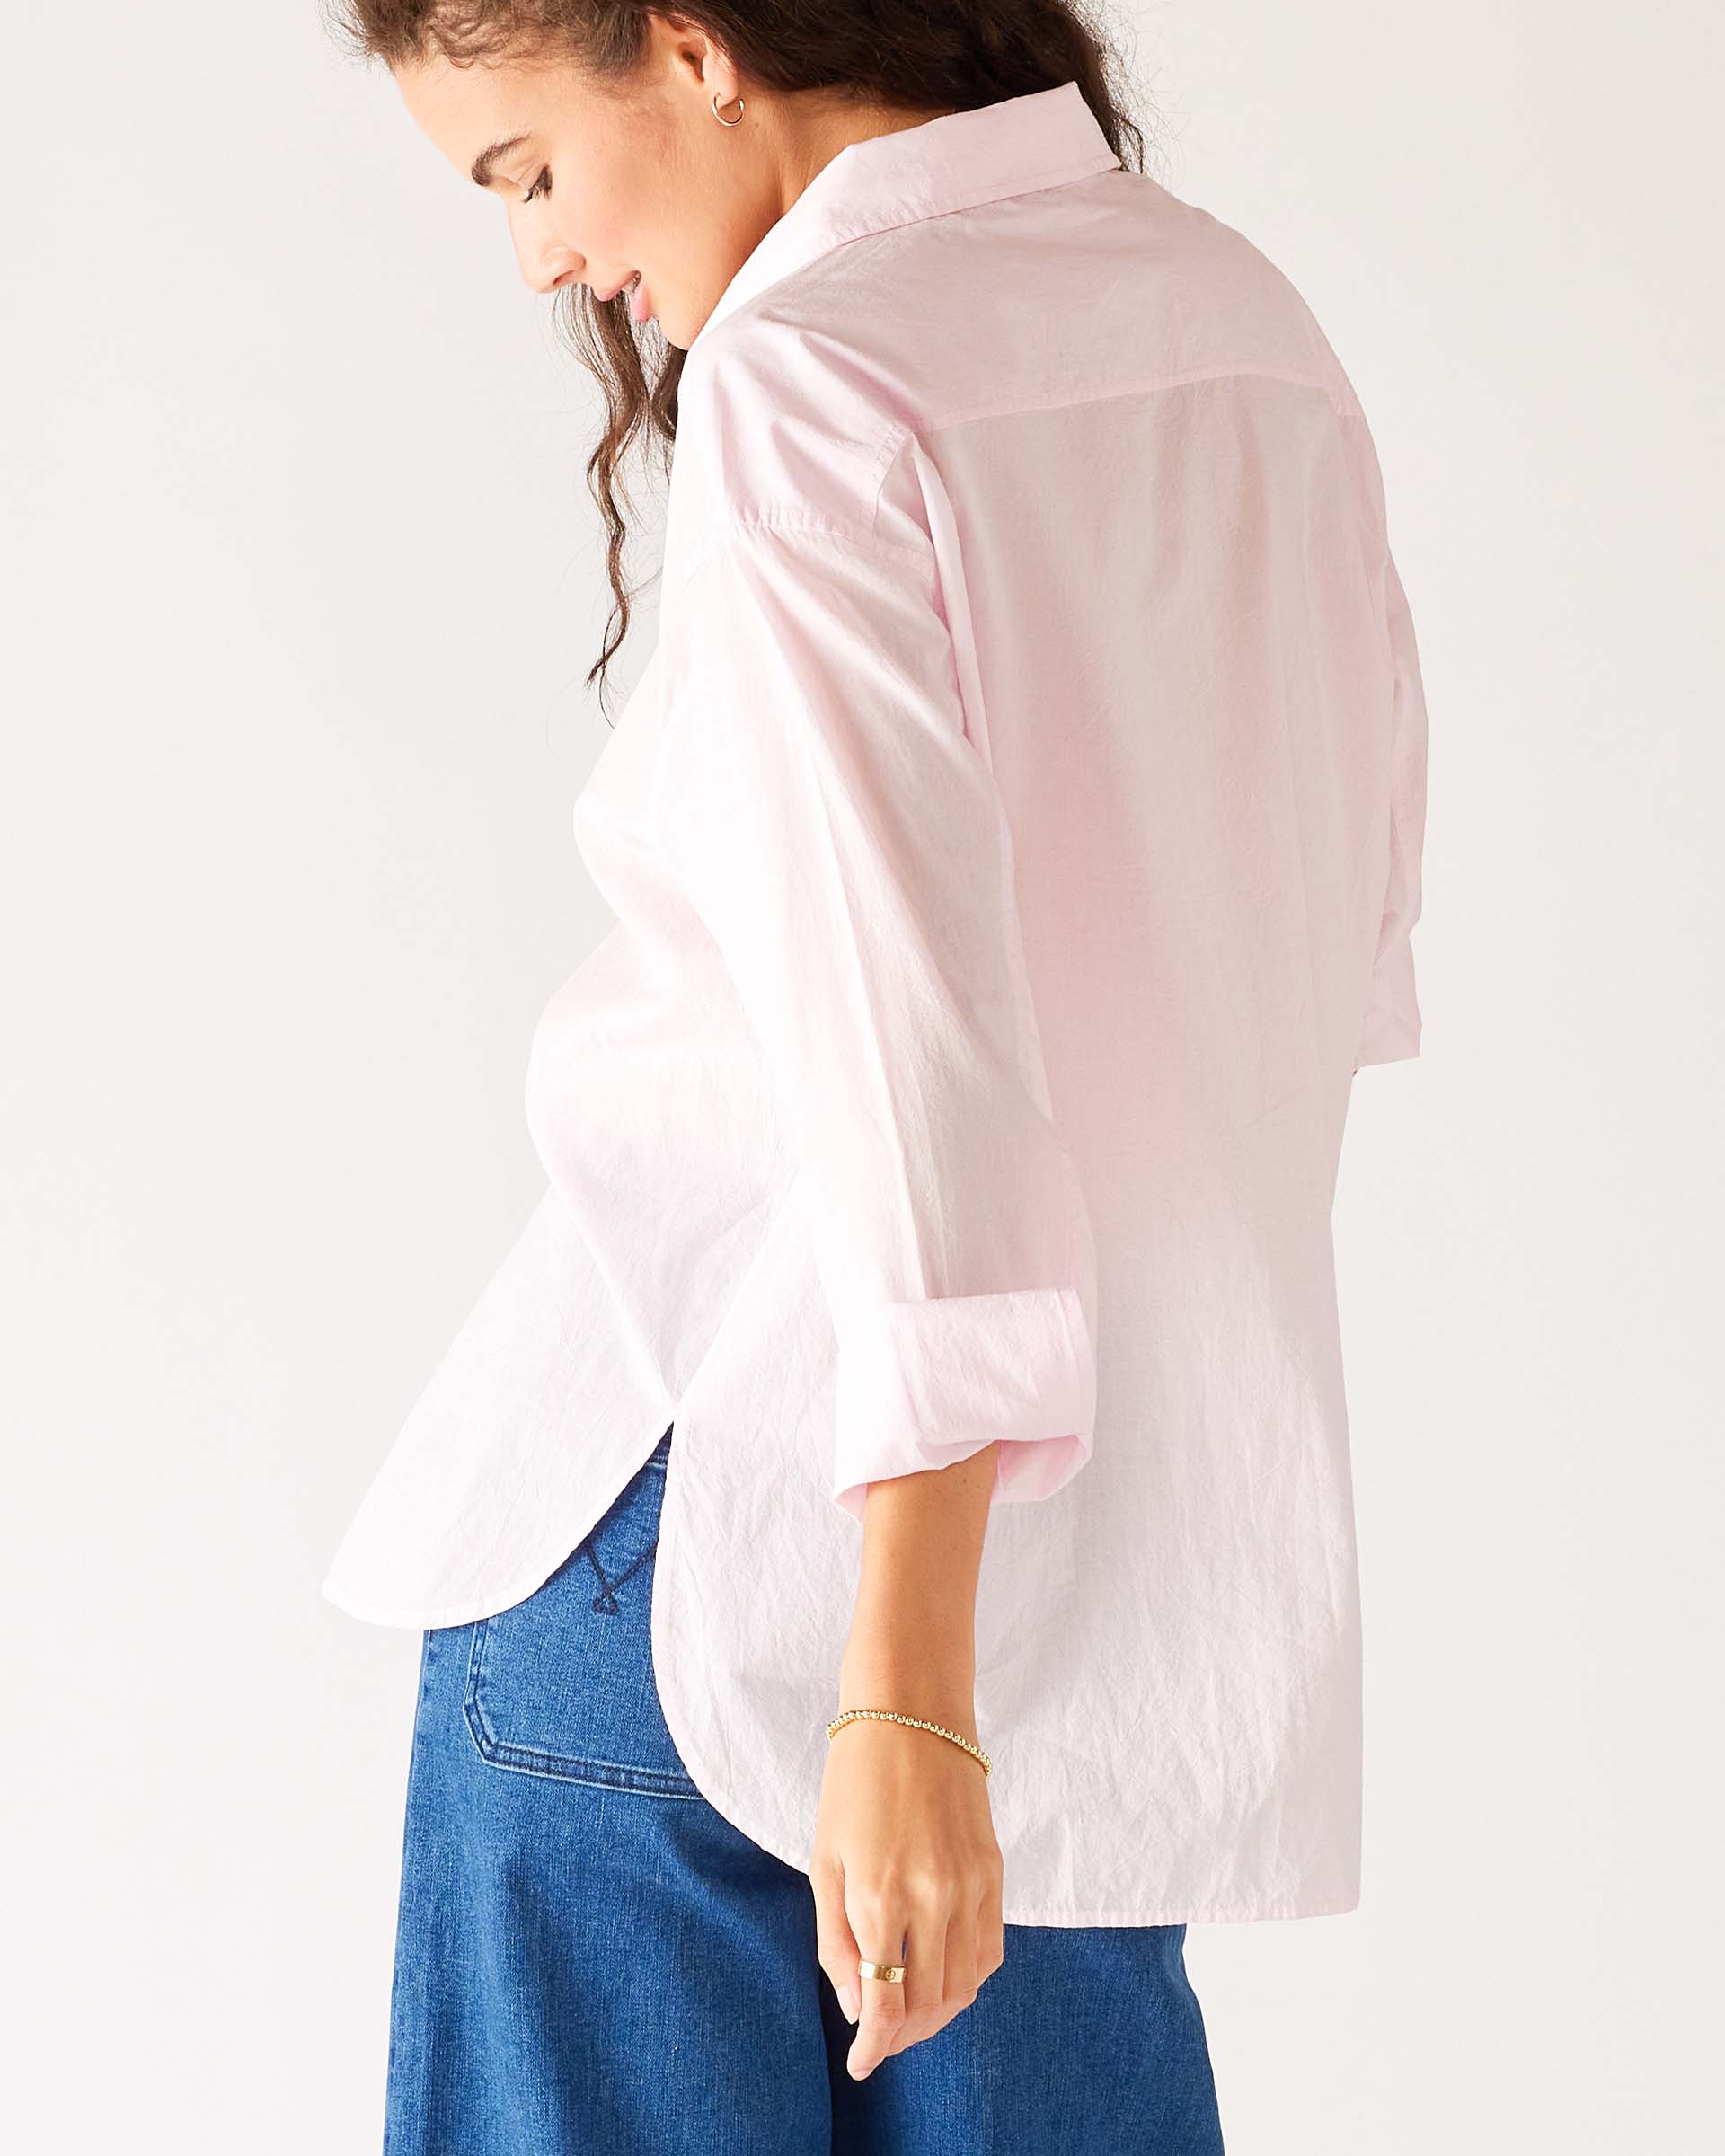 Women's Light Pink Breathable Relaxed Fit Button Up Shirt Side View Cuff Detail